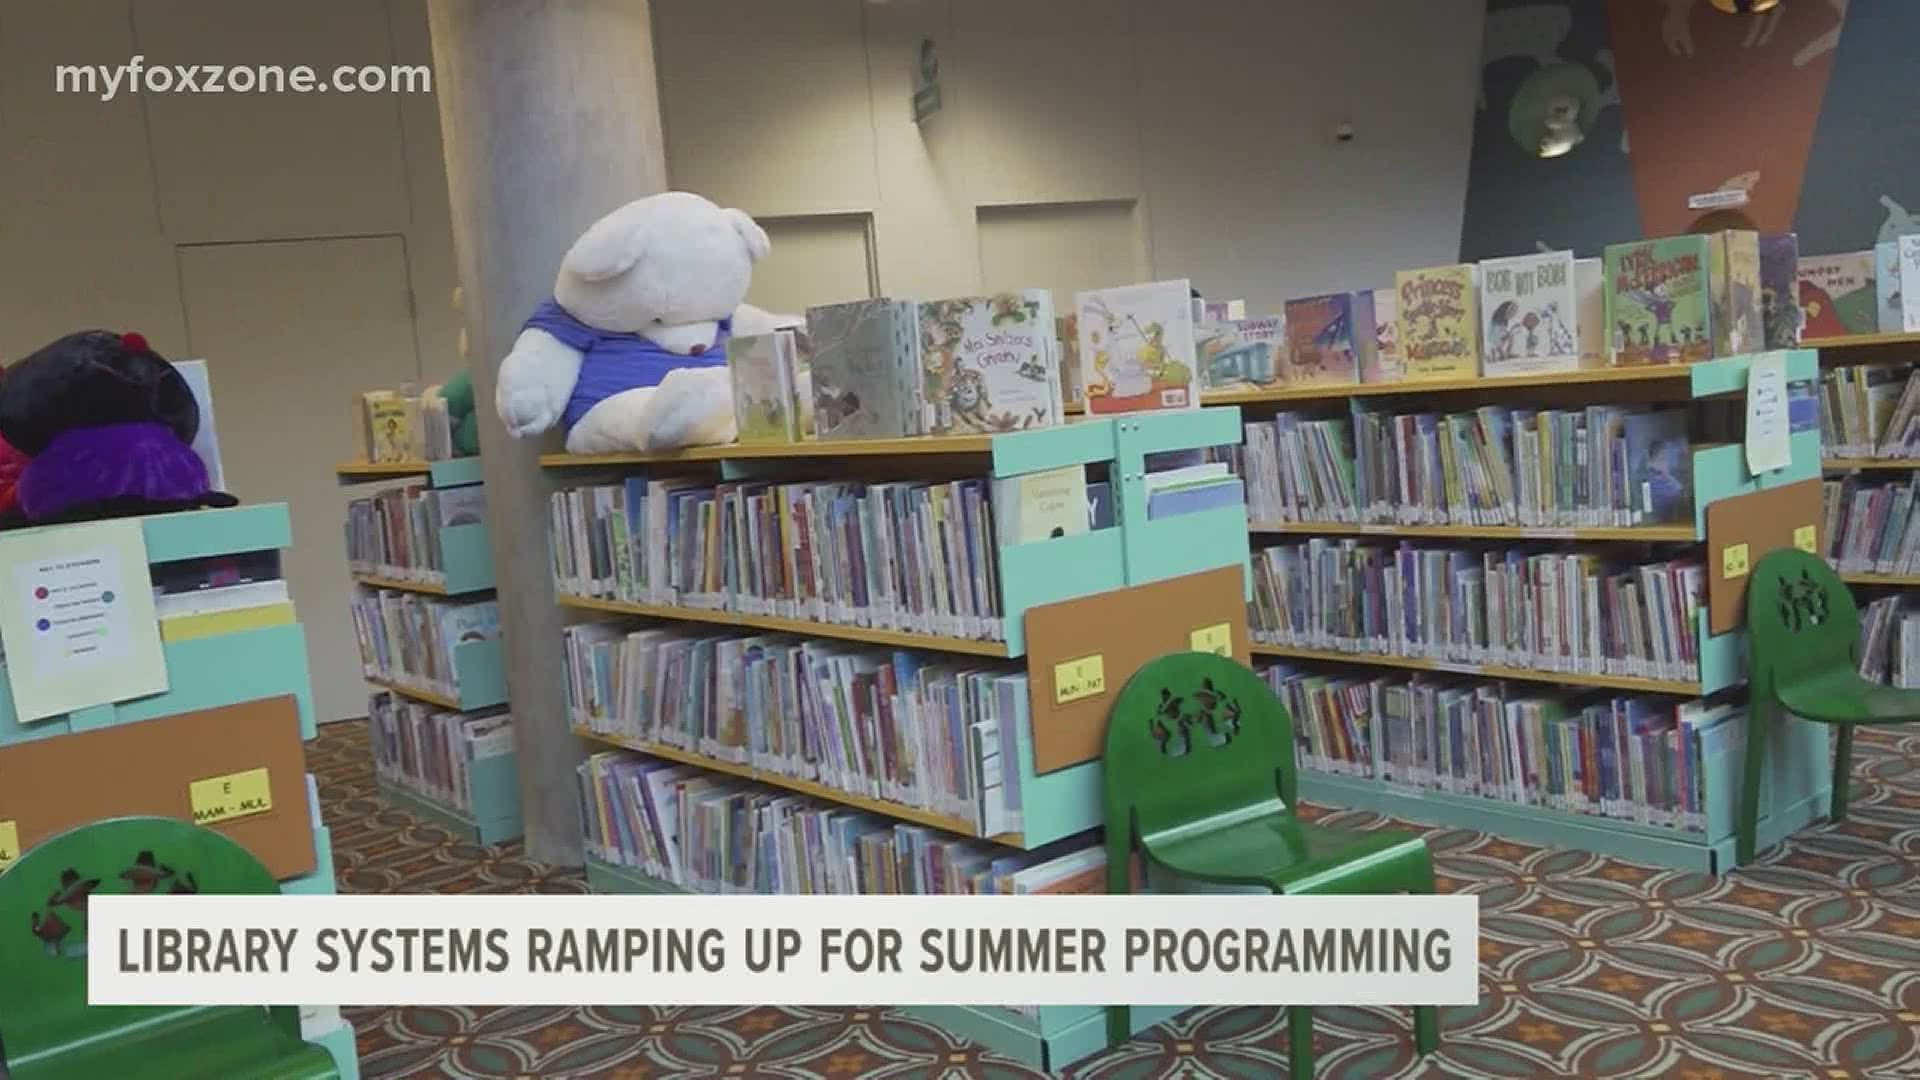 Tom Green County Library and Abilene Public Library begin children's summer reading programs starting the first week of June.